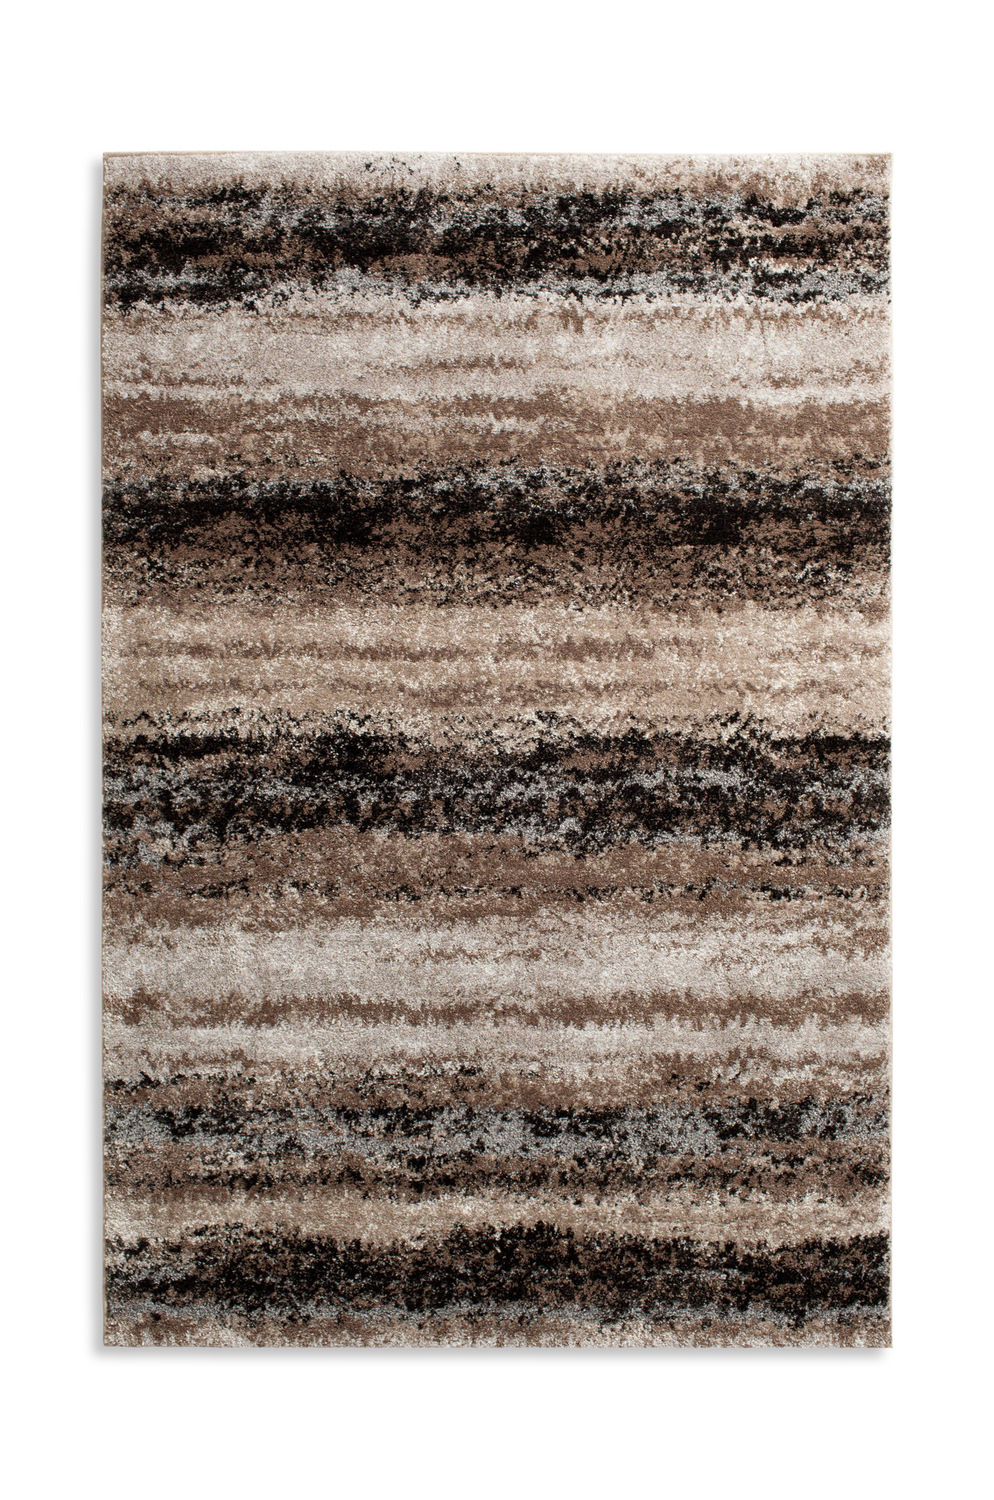 Structures Mount Vernon Soot Parchment 7 10  x 9 10  Area Rug